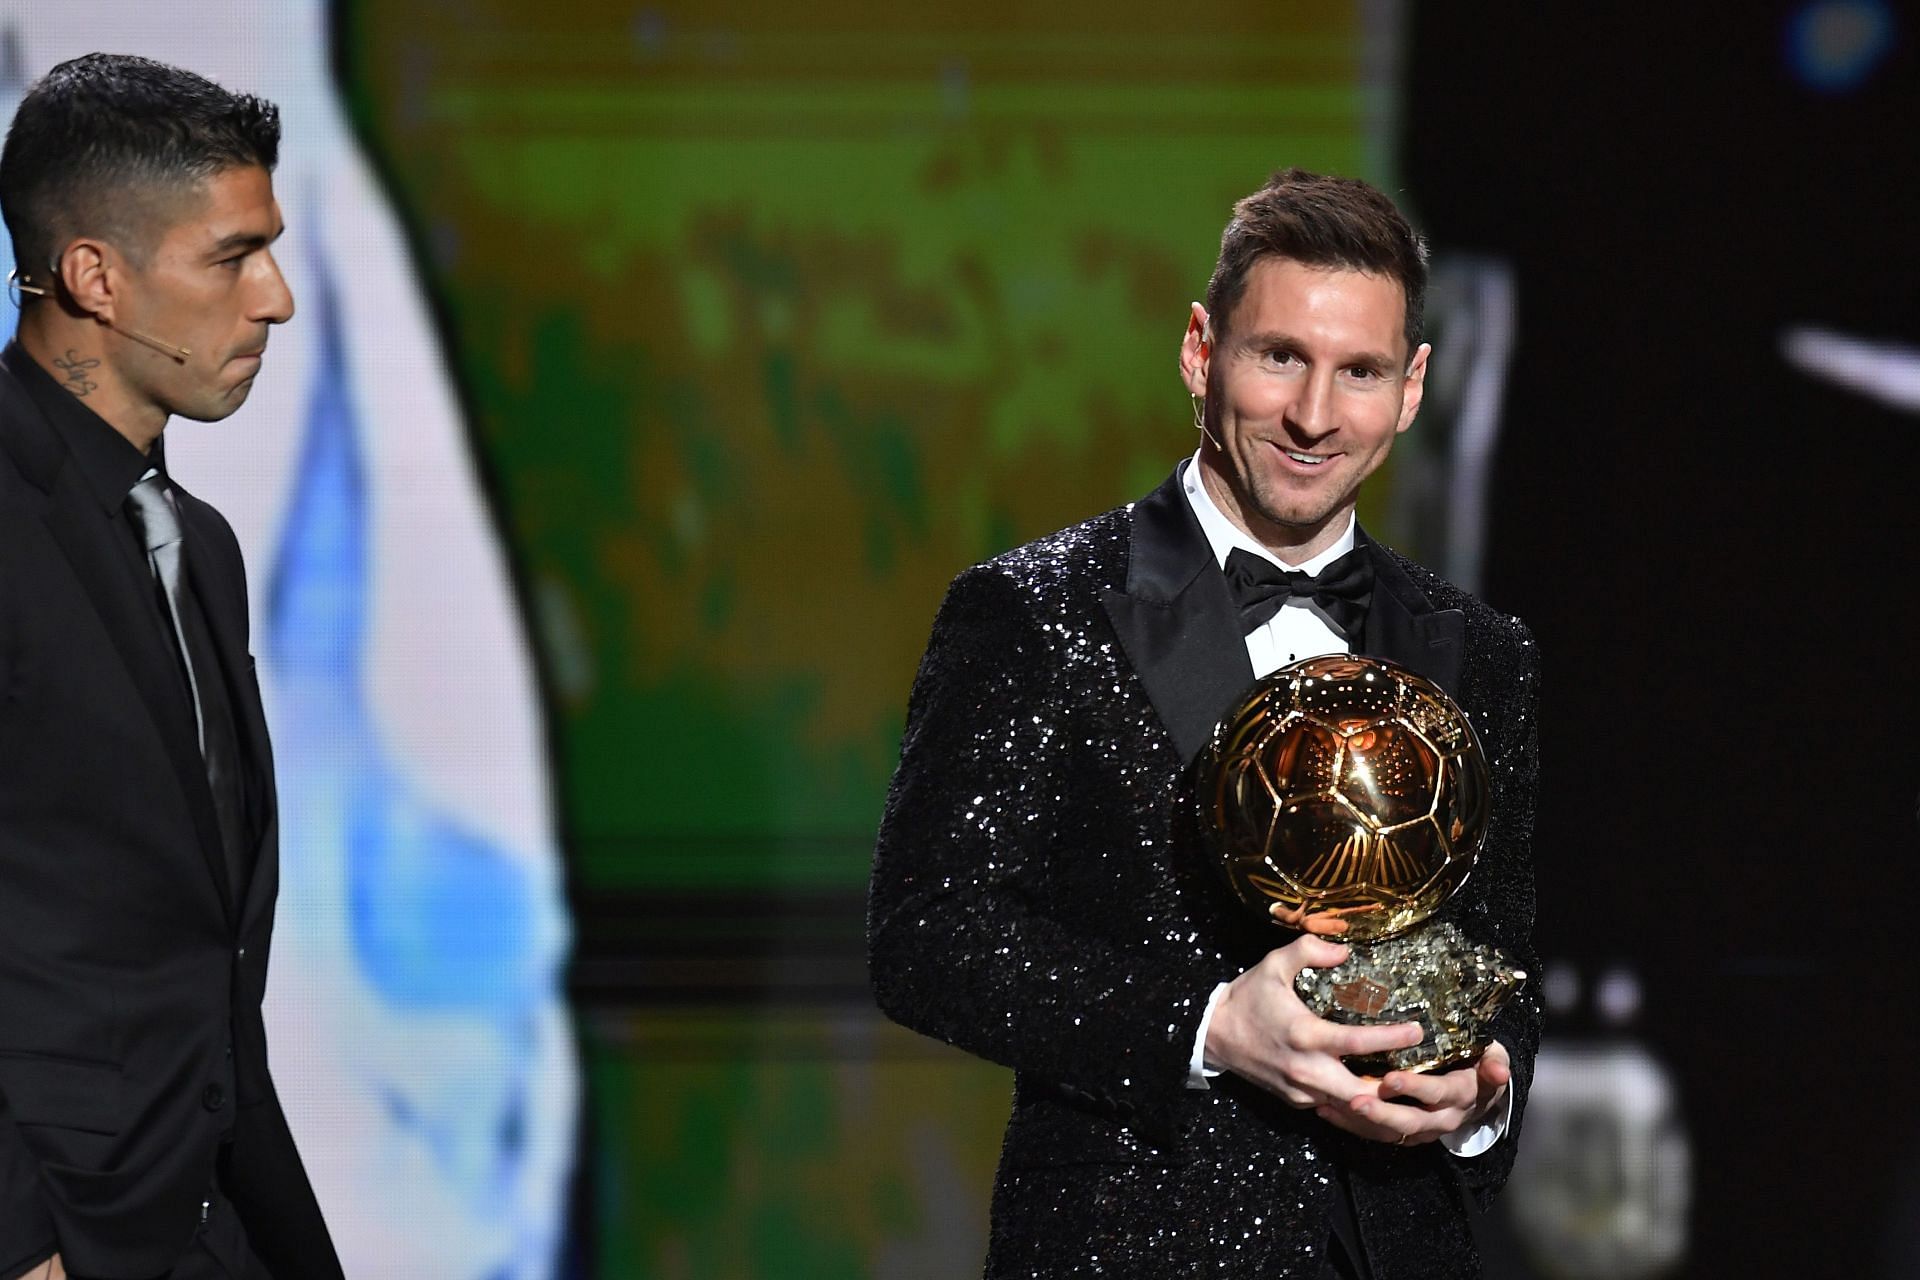 Lionel Messi won the accolade for the seventh time last year